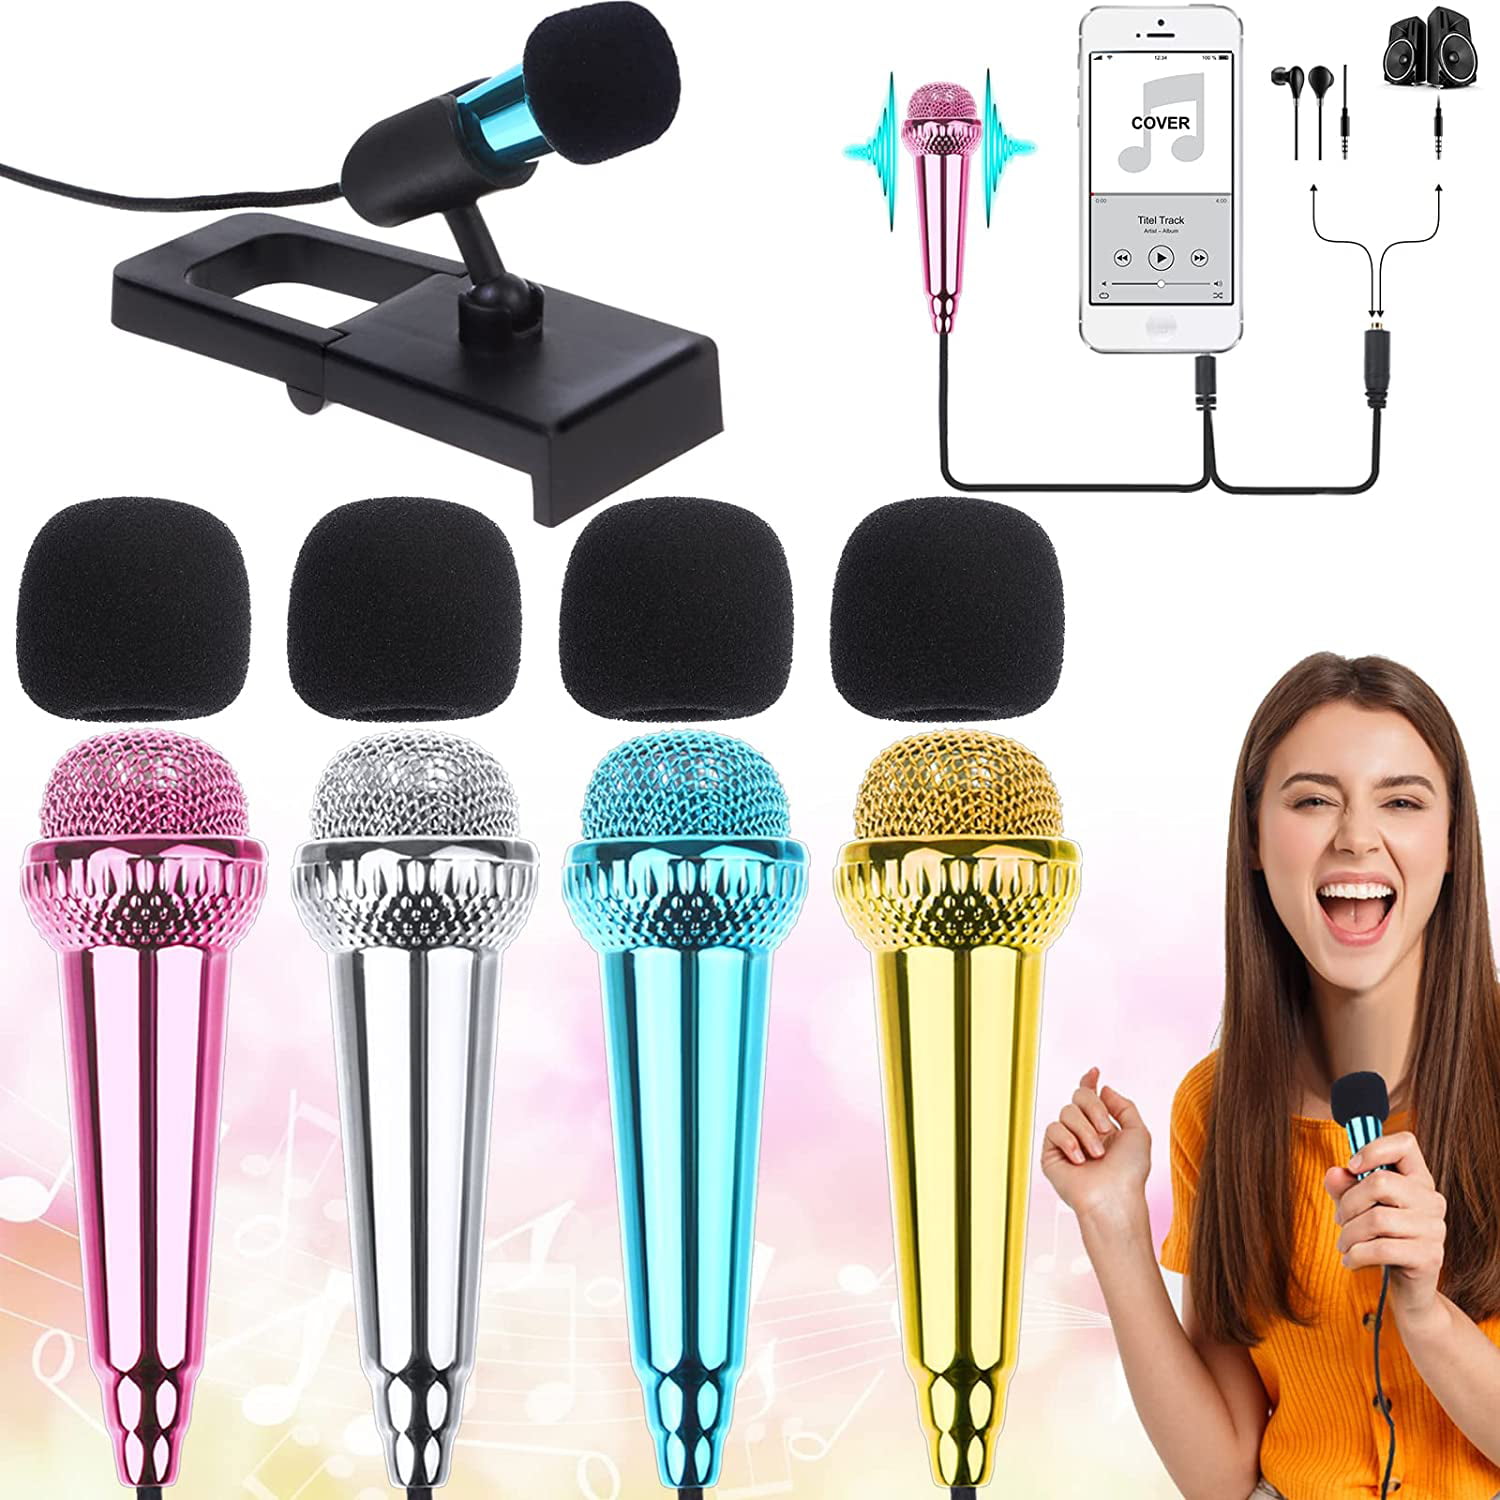 1-Piece, Black Metal Windproof Foam Cover and Stand 3.5 mm Input Android Phones or Tablet with 113 cm Cord Mini Microphone Tiny Microphone Mini Mic for Recording Voice and Singing on iPhone 